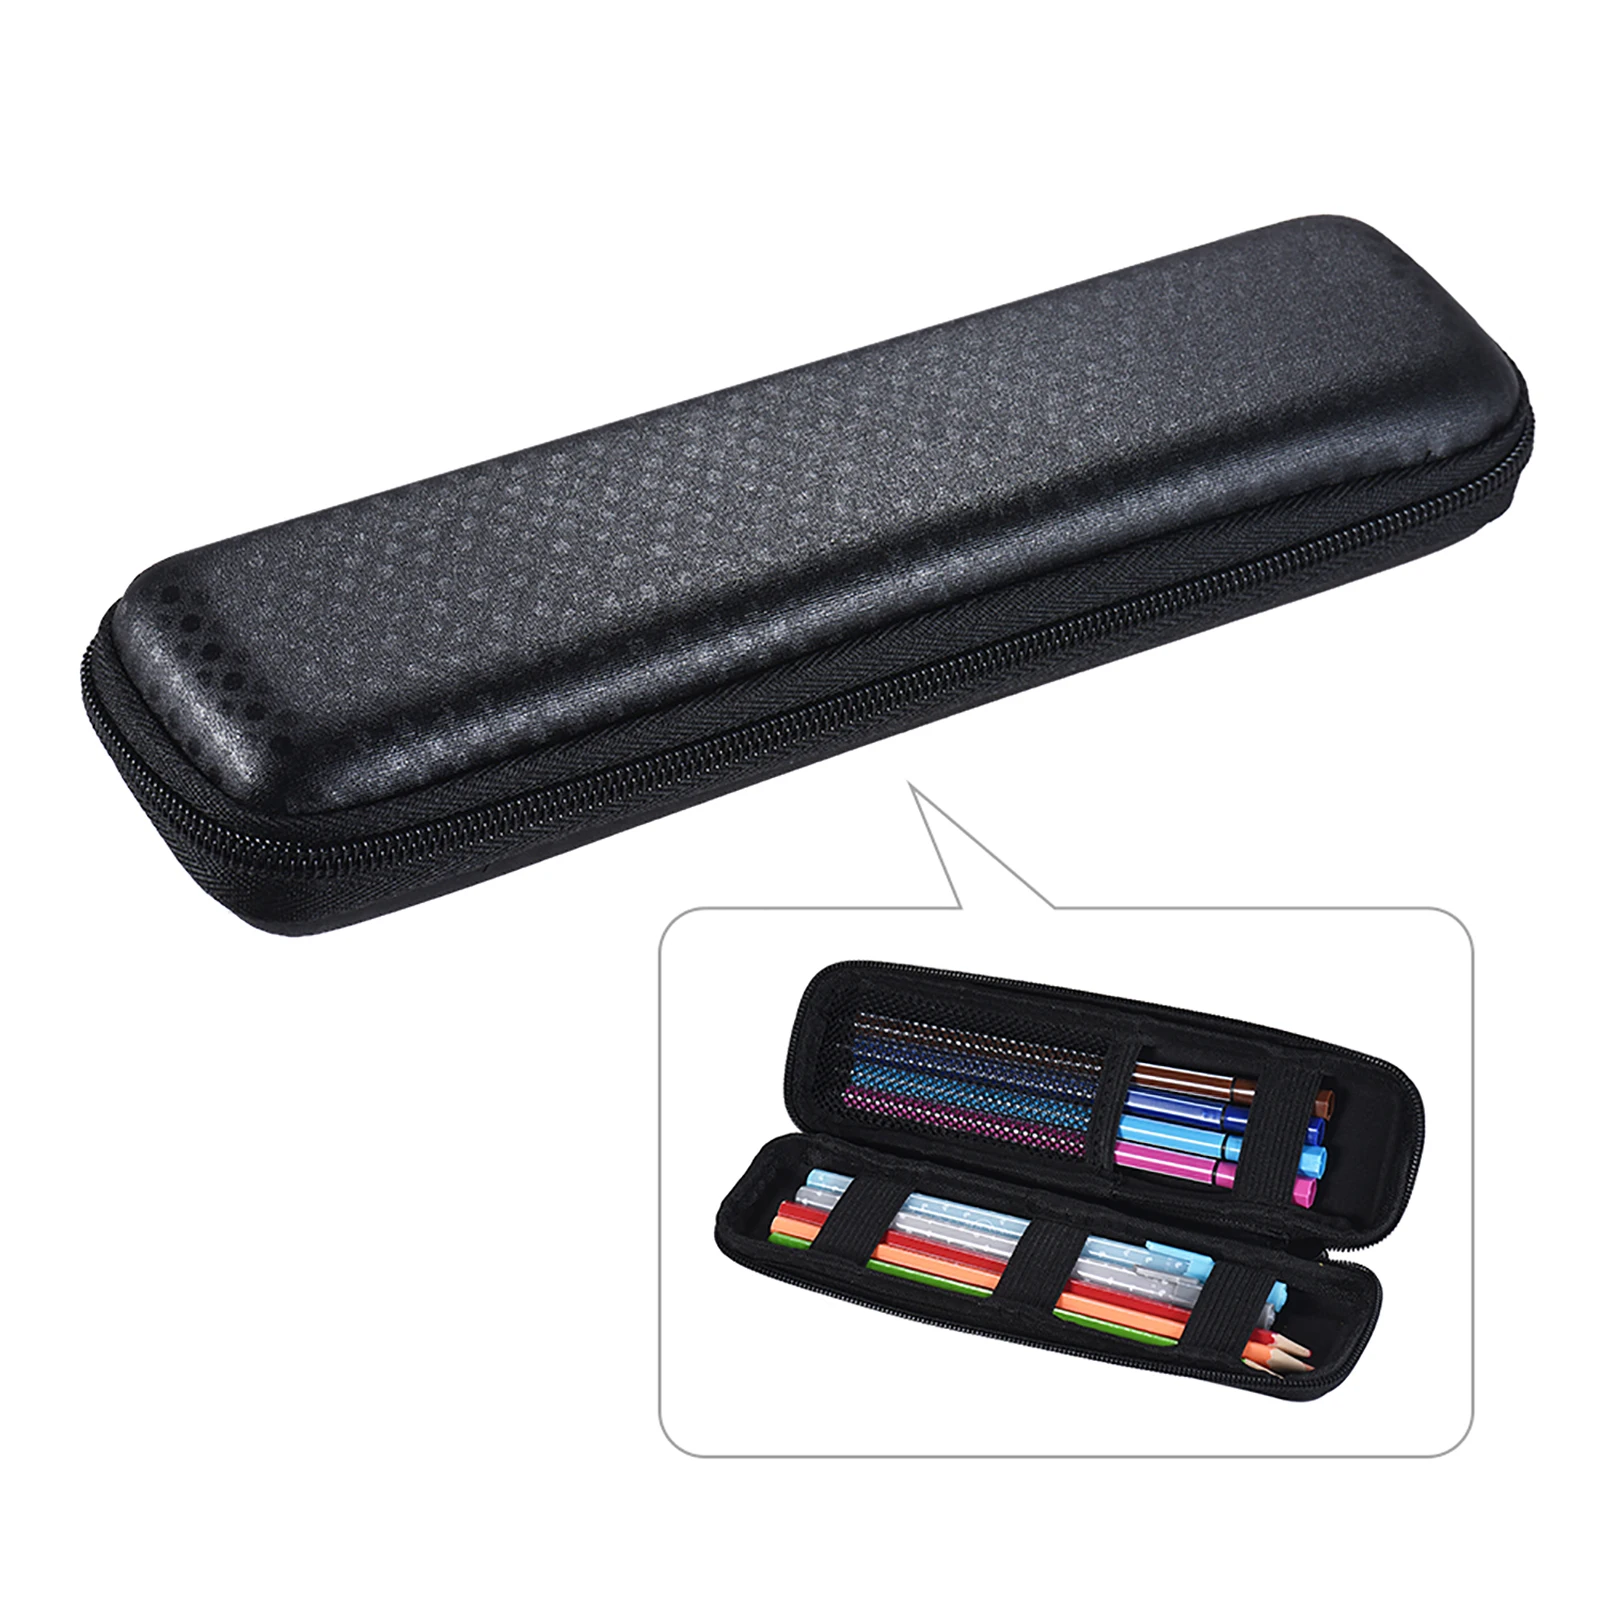 2021 Great Products Pen Pencil PPT Pointer Holder Makeup Brush Bag EVA Hard Shell Case Stationery Pouch Box Black Fast Shipping